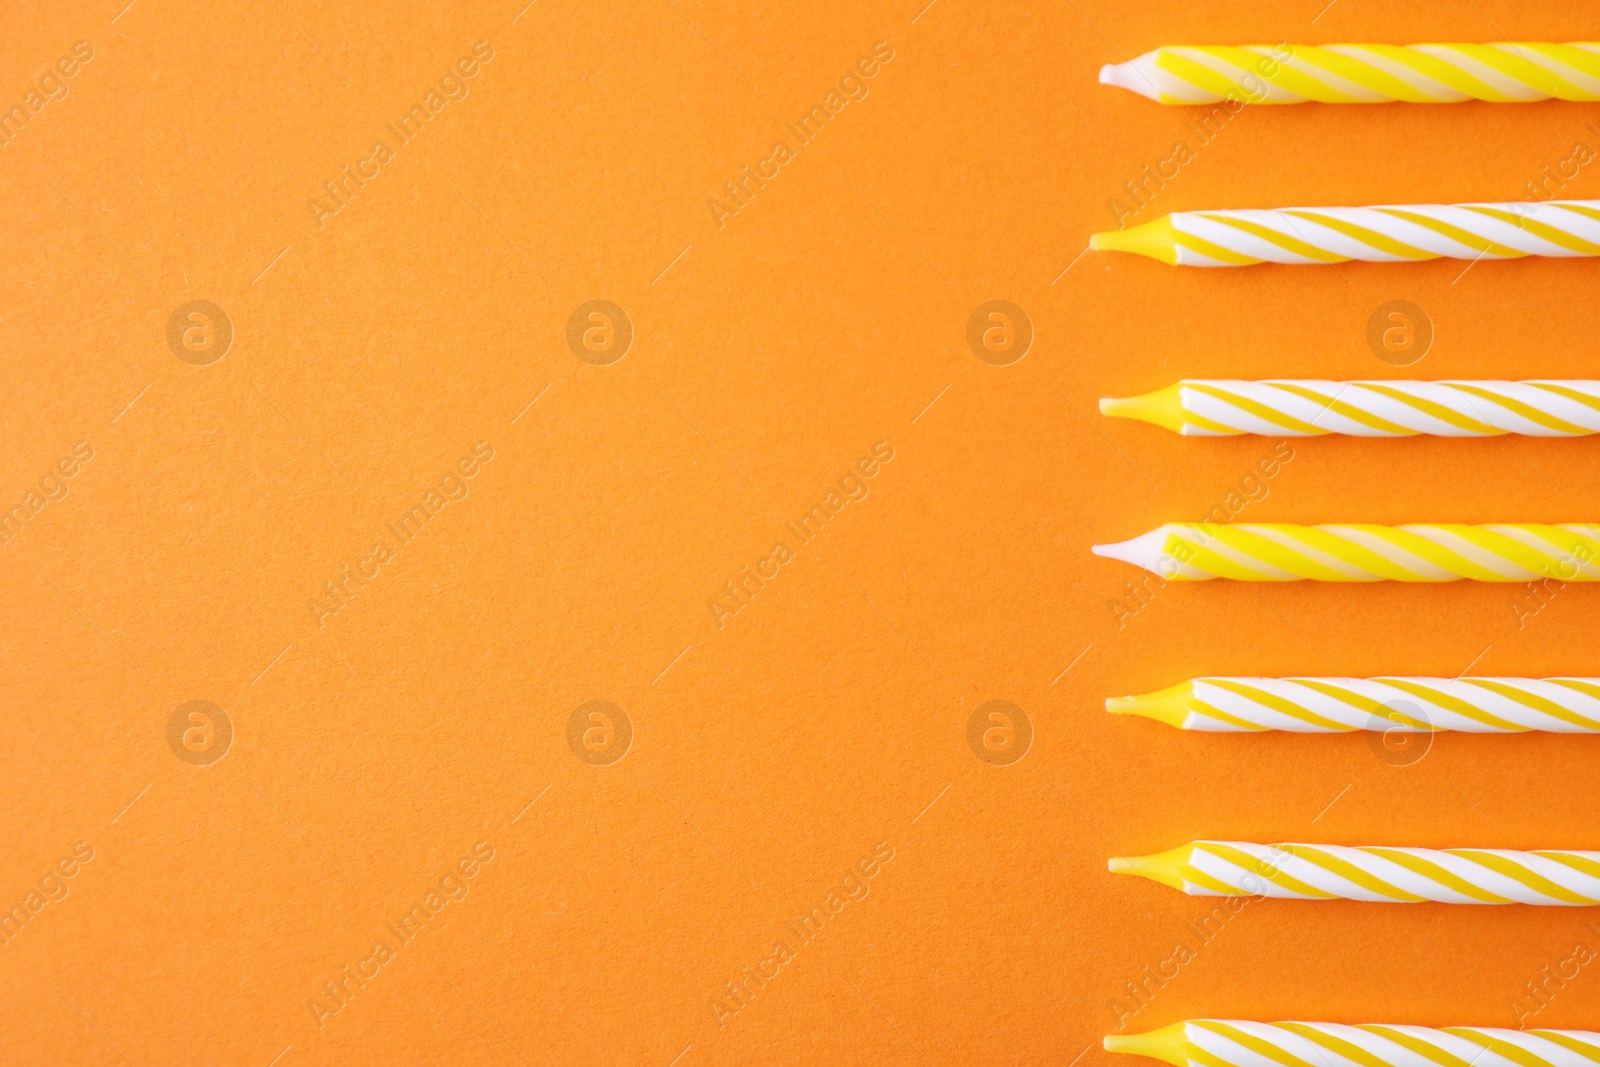 Photo of Colorful striped birthday candles on orange background, top view with space for text